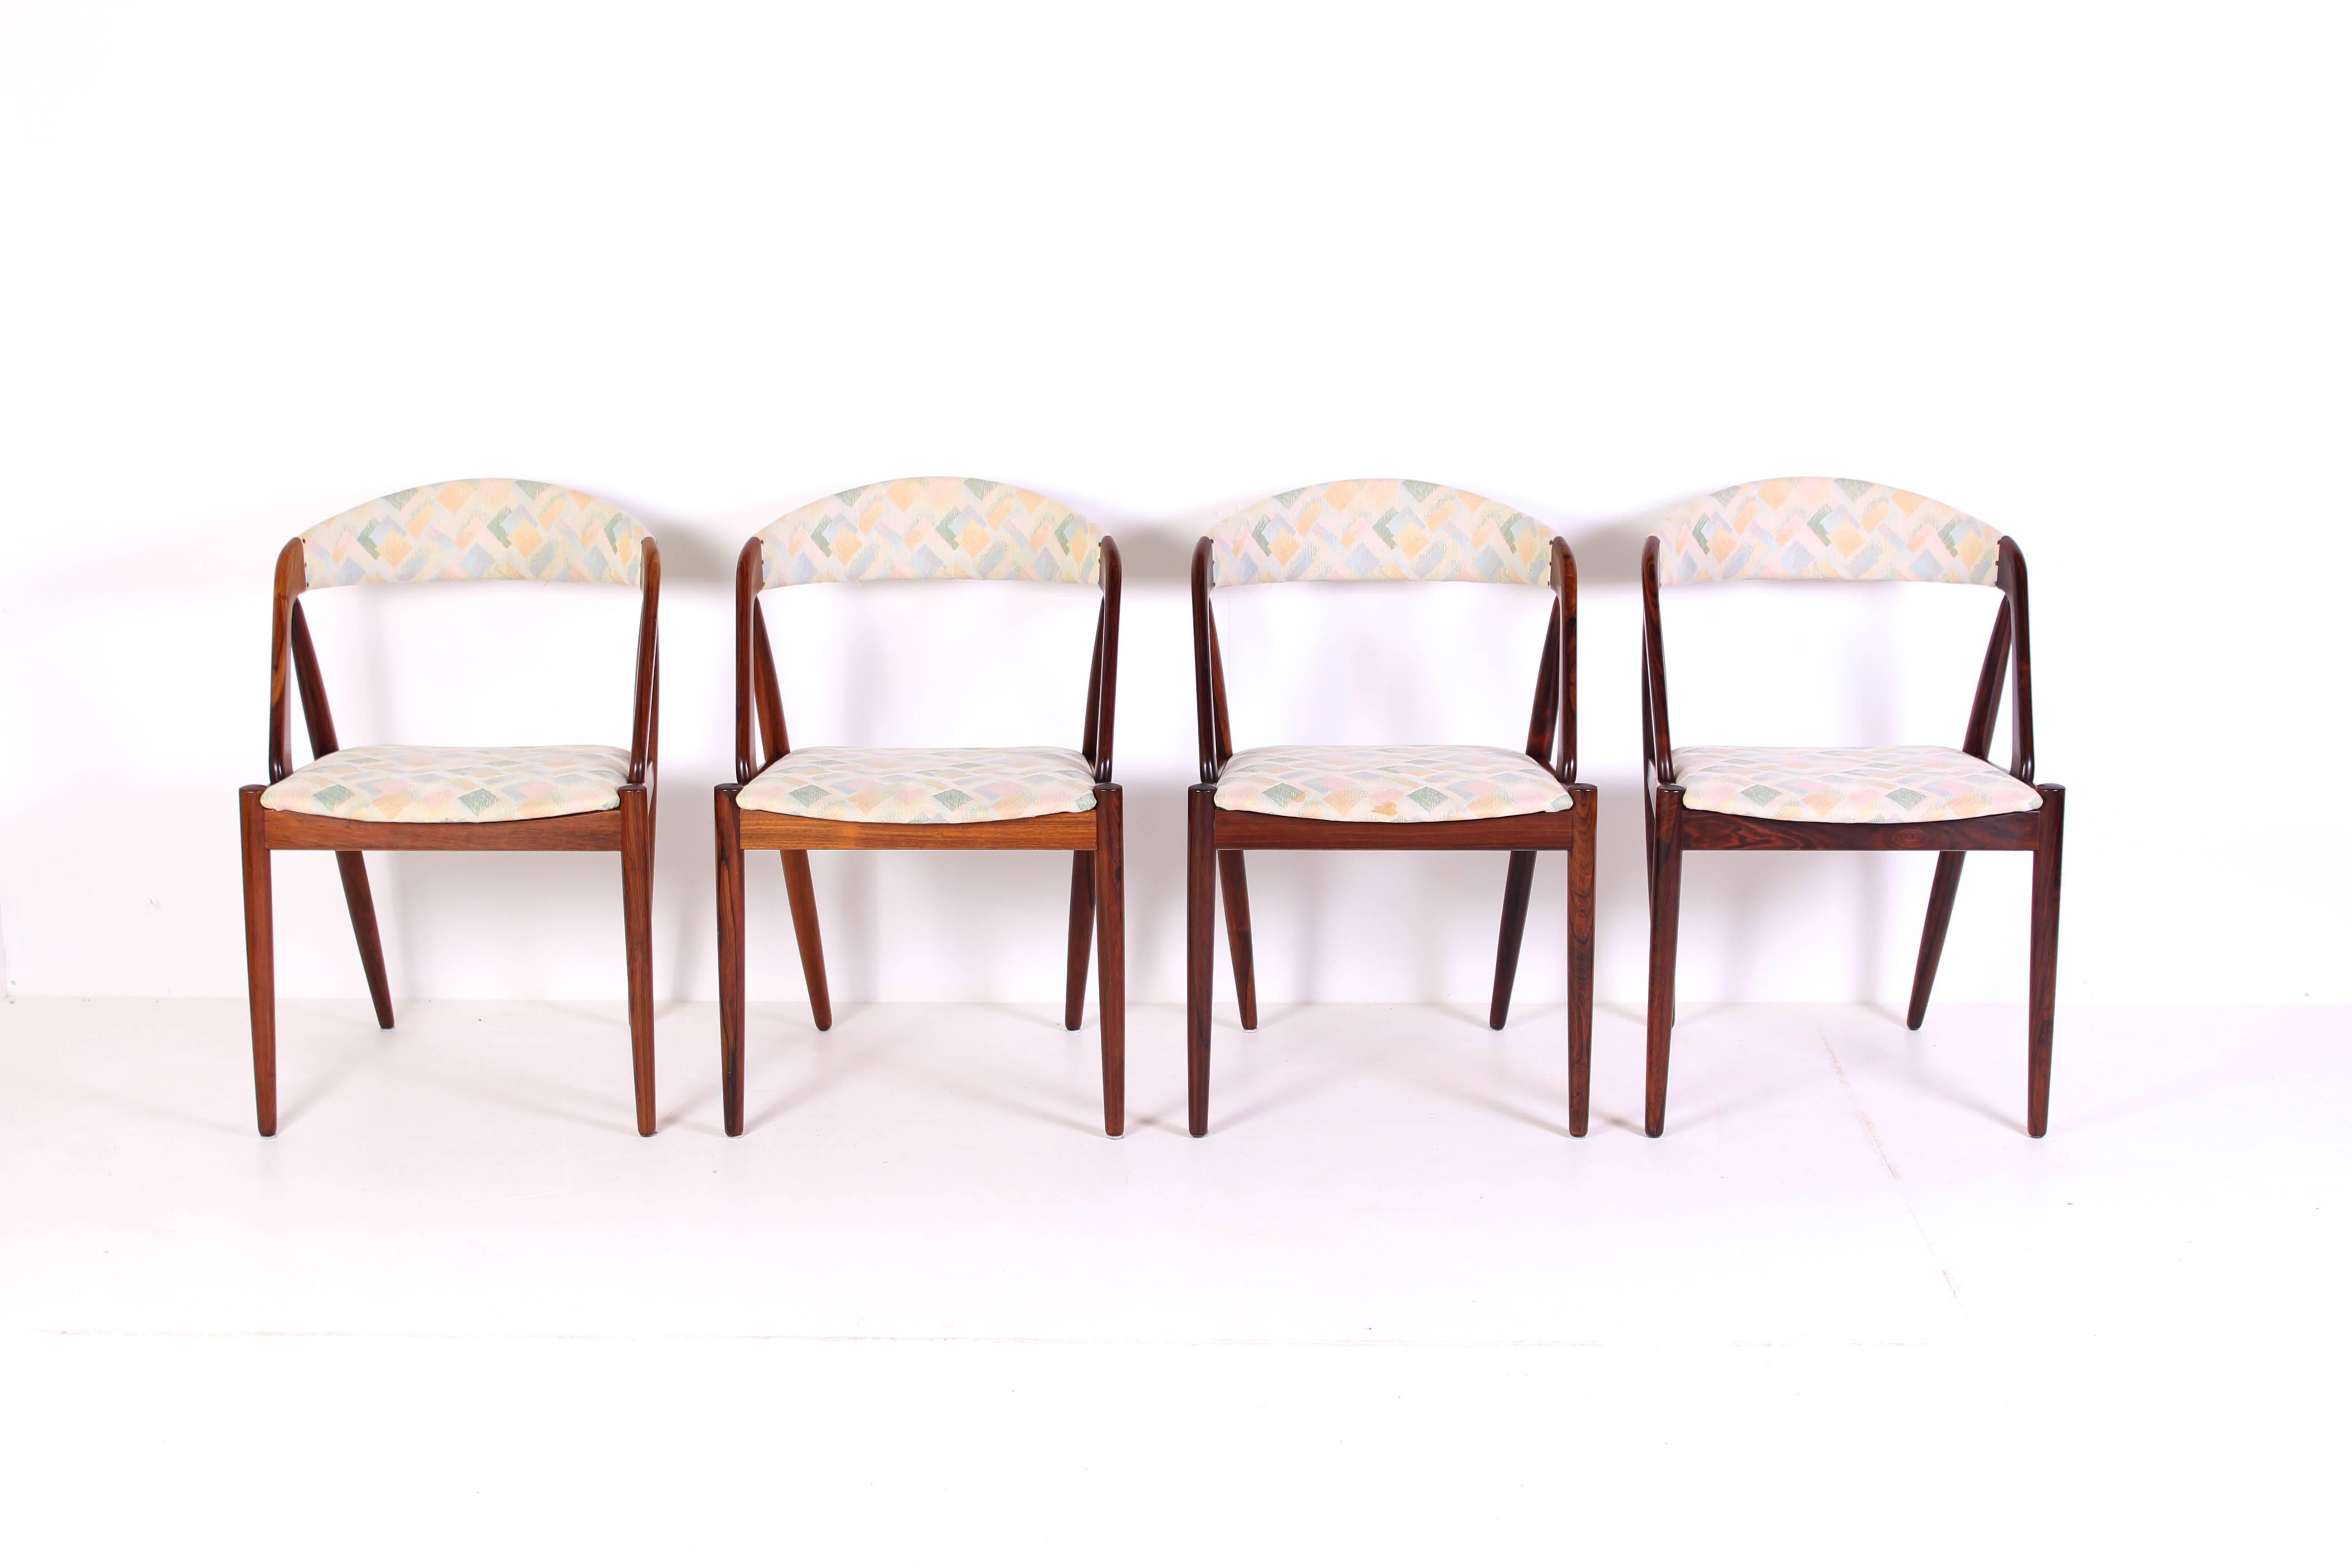 A set of four rosewood dining chairs by Danish designer Kai Kristiansen. The chairs are in very good vintage condition (smaller fading of color related to age) with fabric with only very small signs of usage.